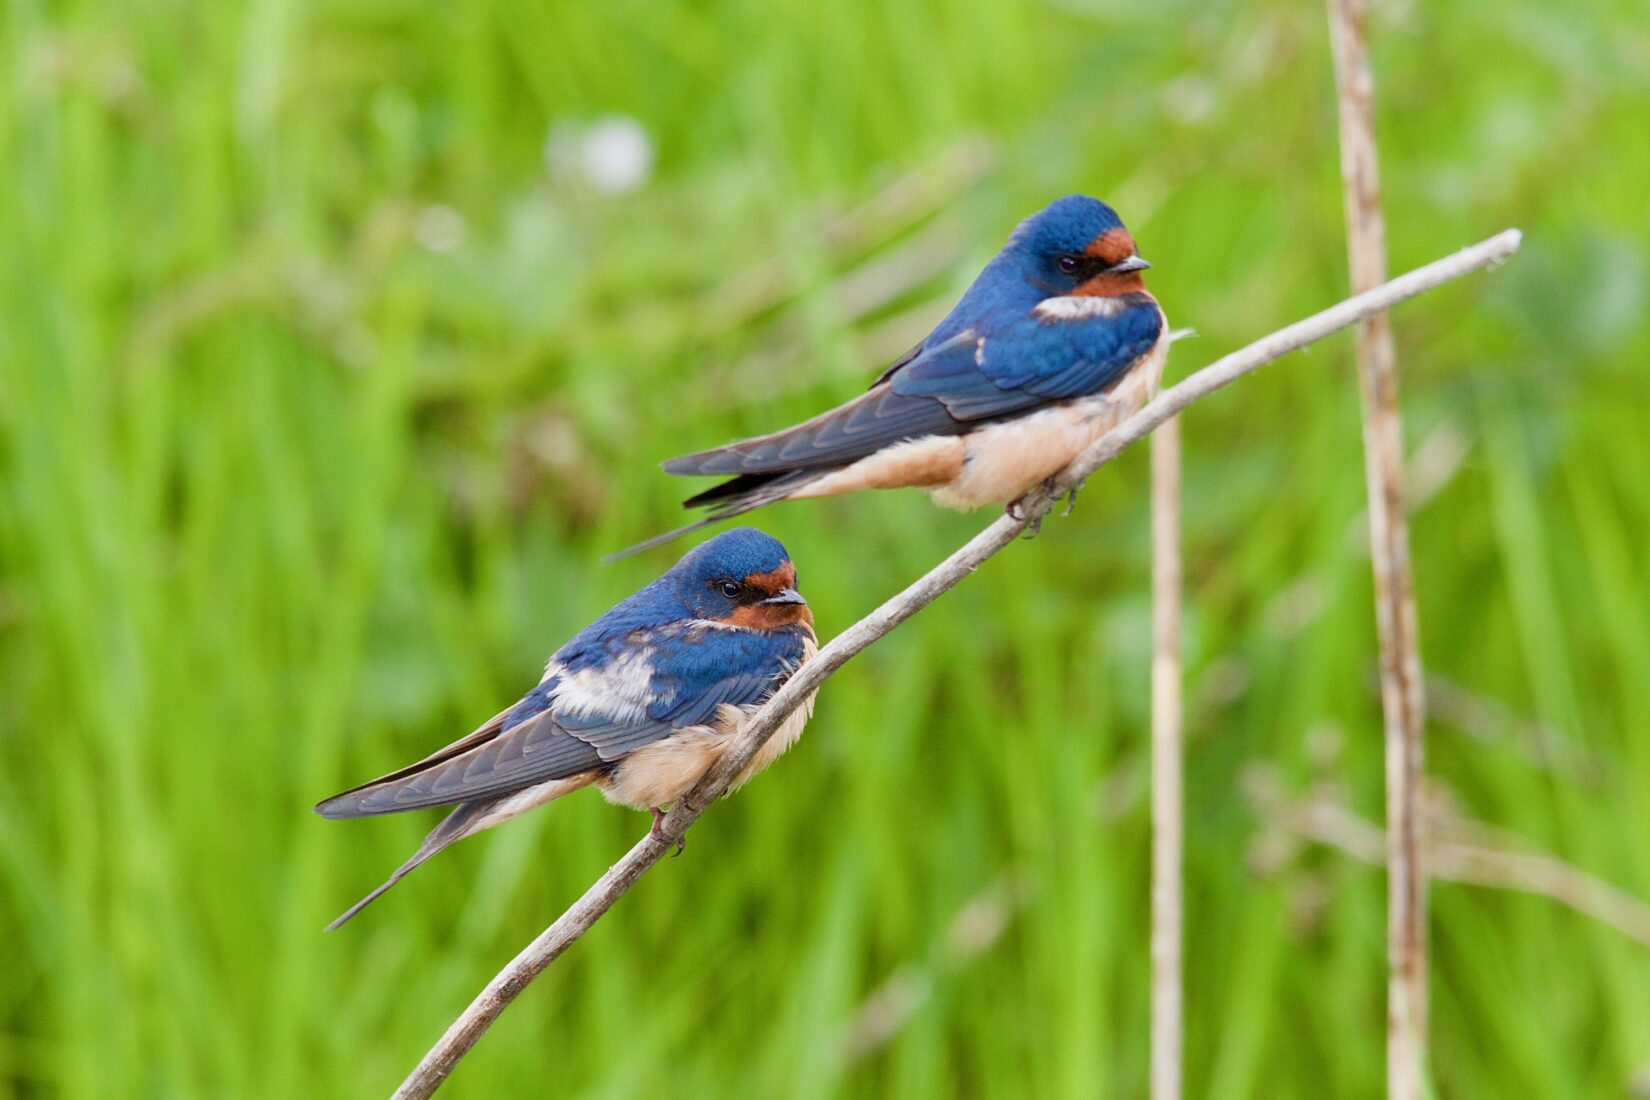 Barn swallow pair sitting on a branch